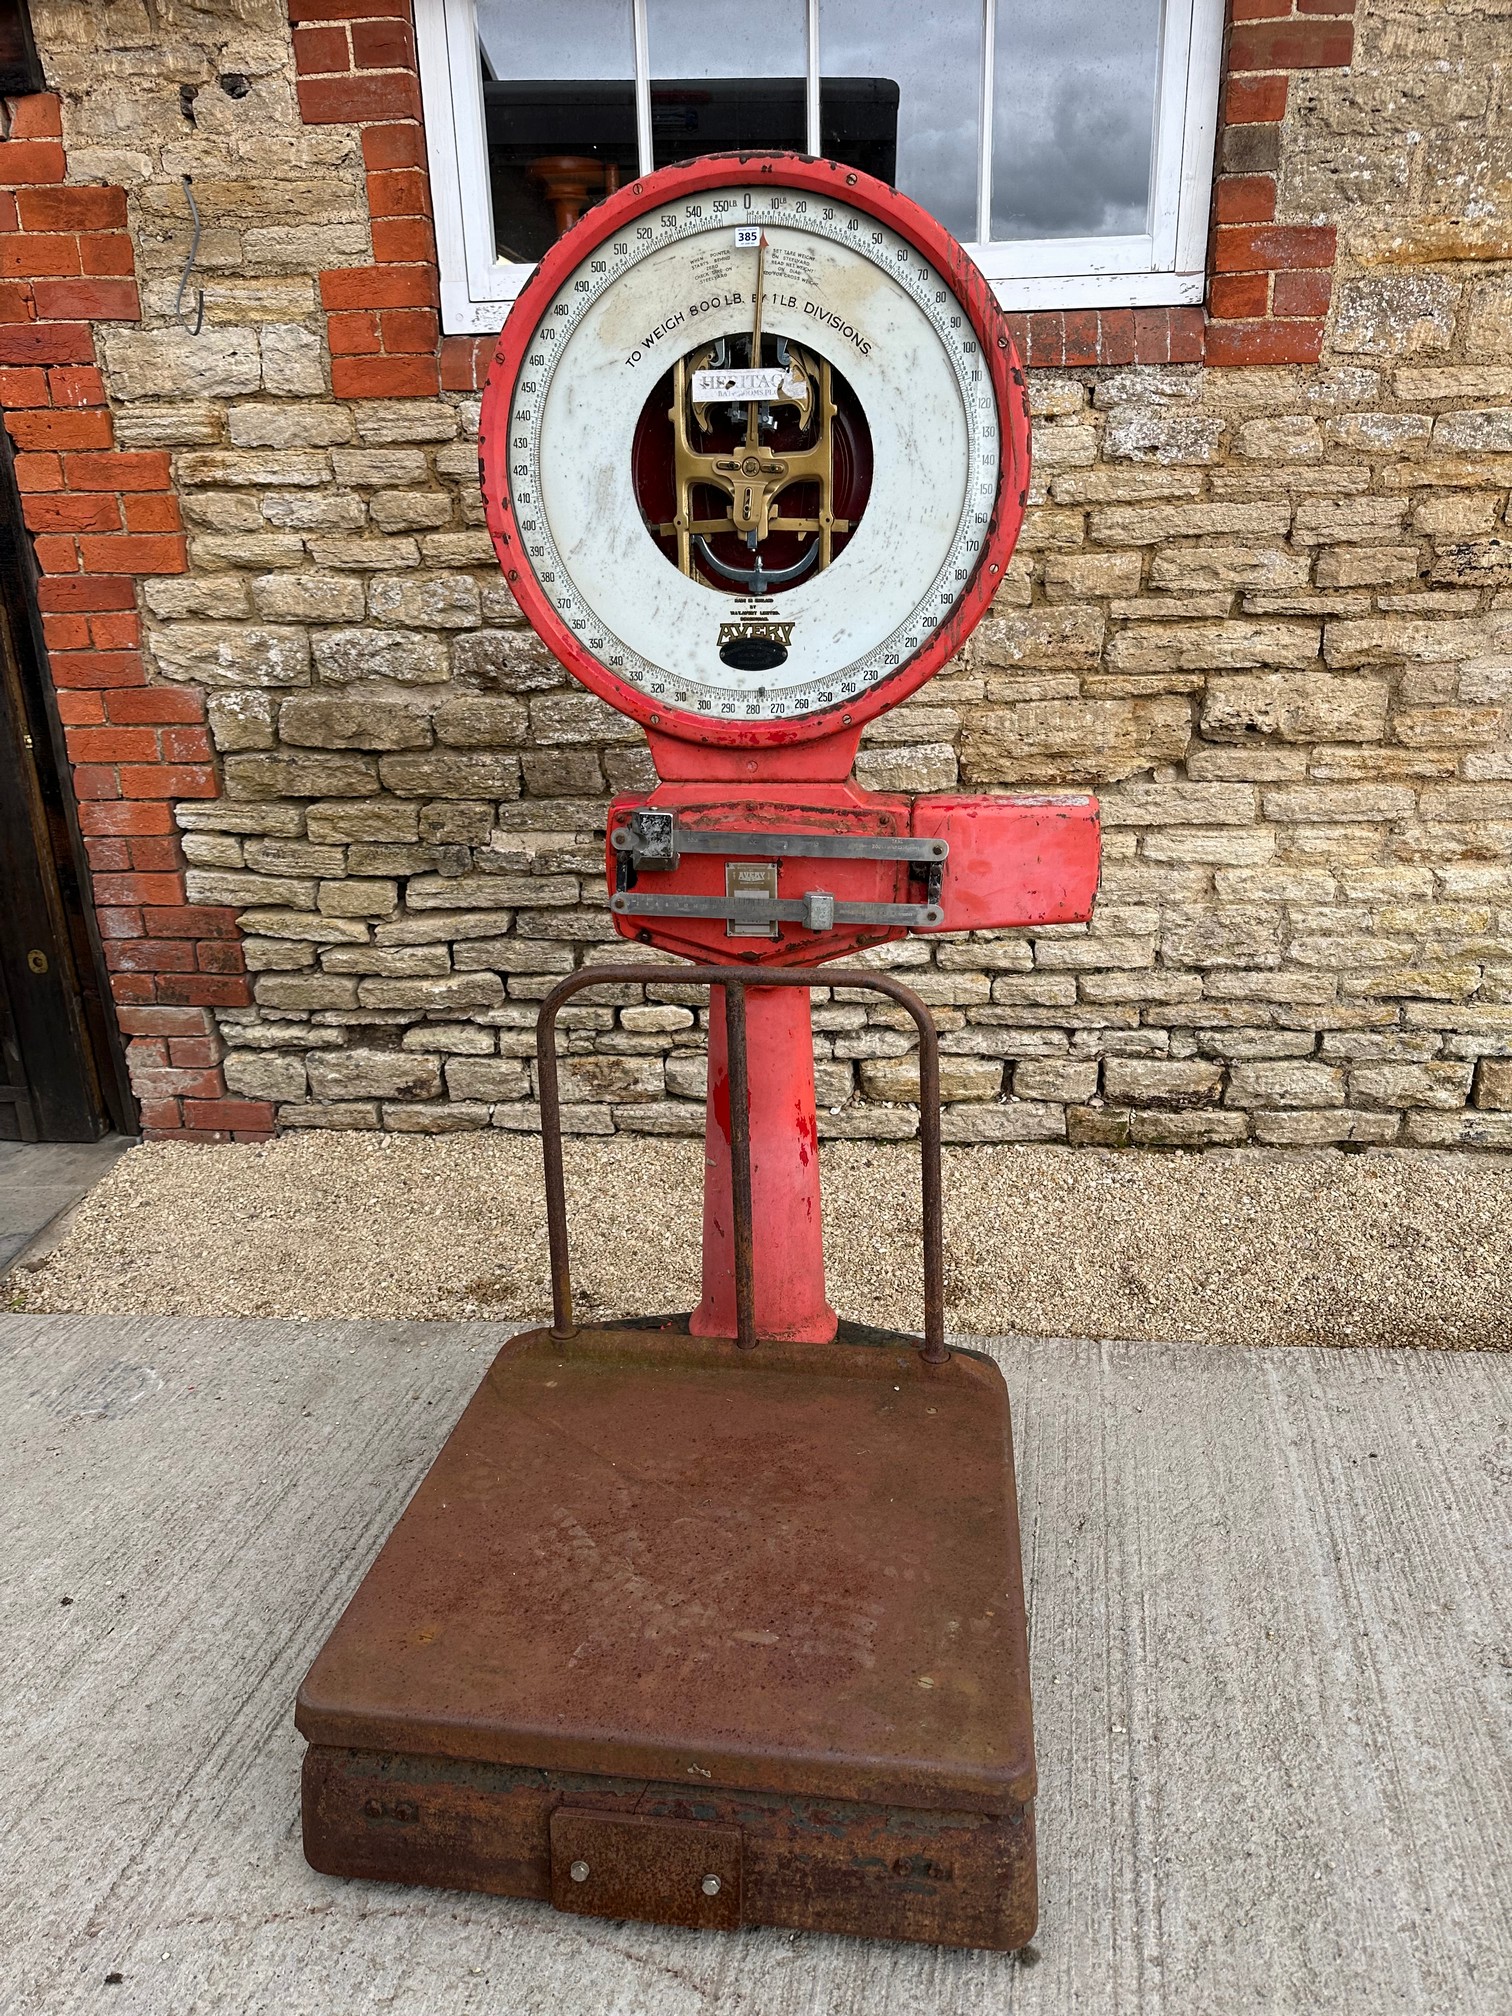 A set of Avery industrial platform weigh scales, by repute from Bitton Railway, will weigh up to